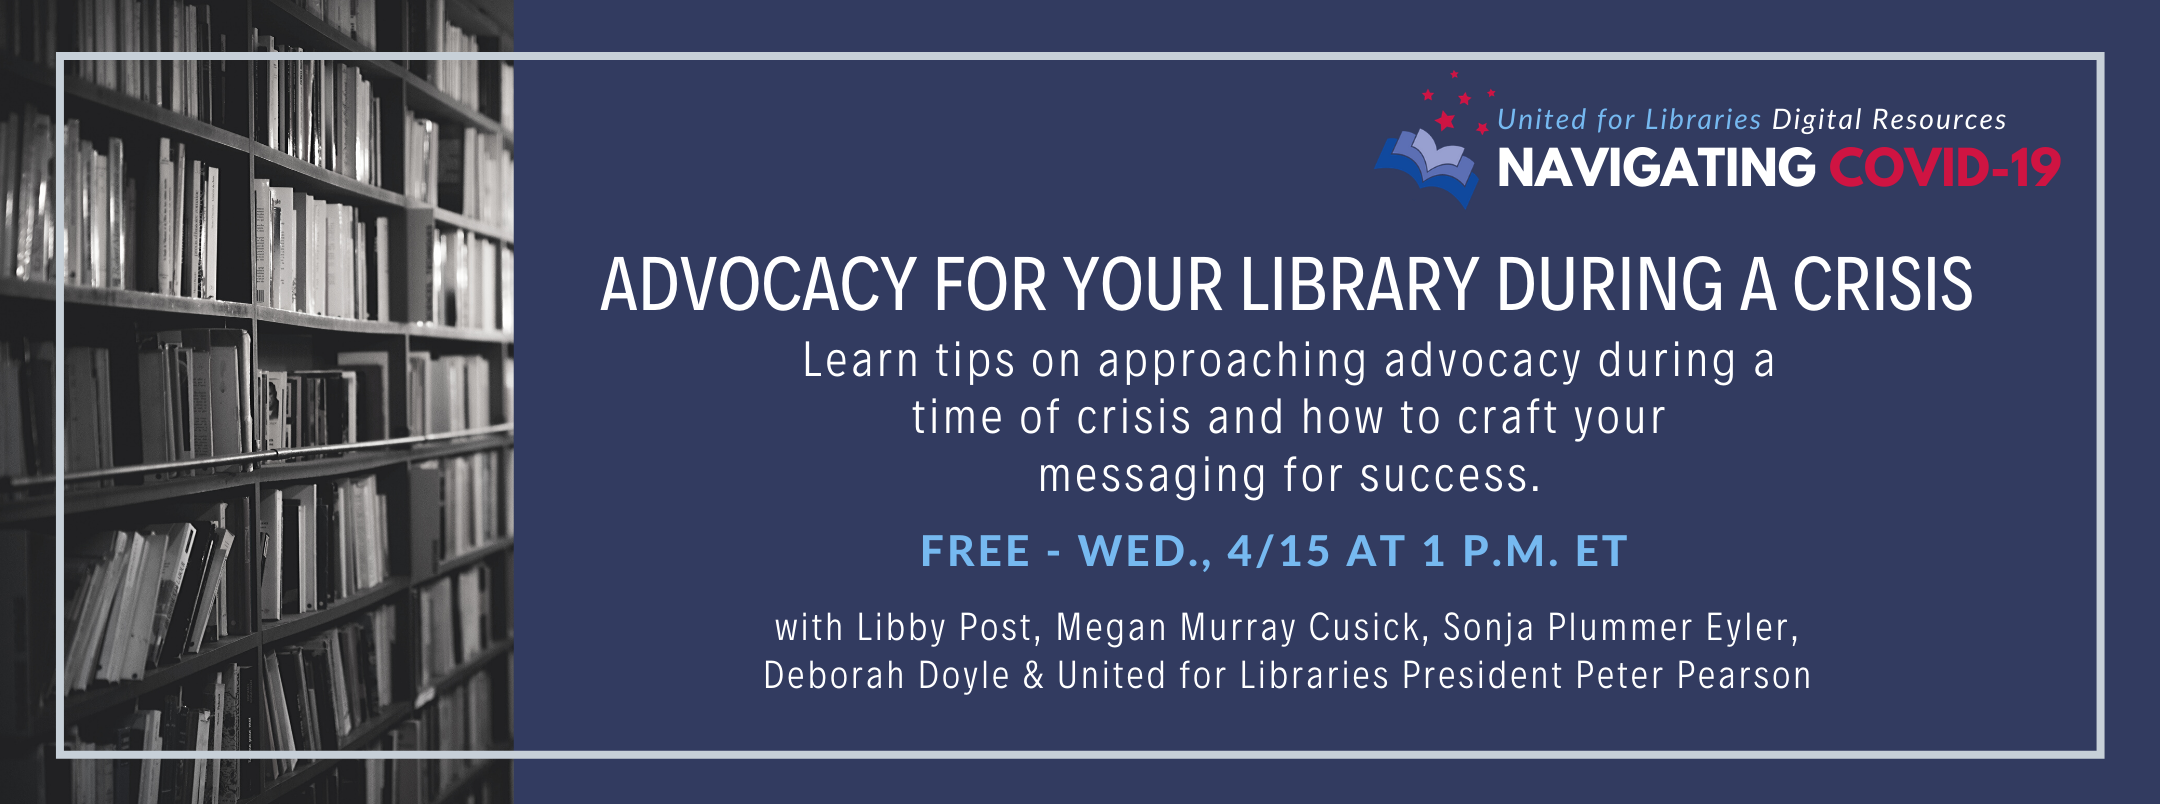 Advocacy for Your Library During a Crisis